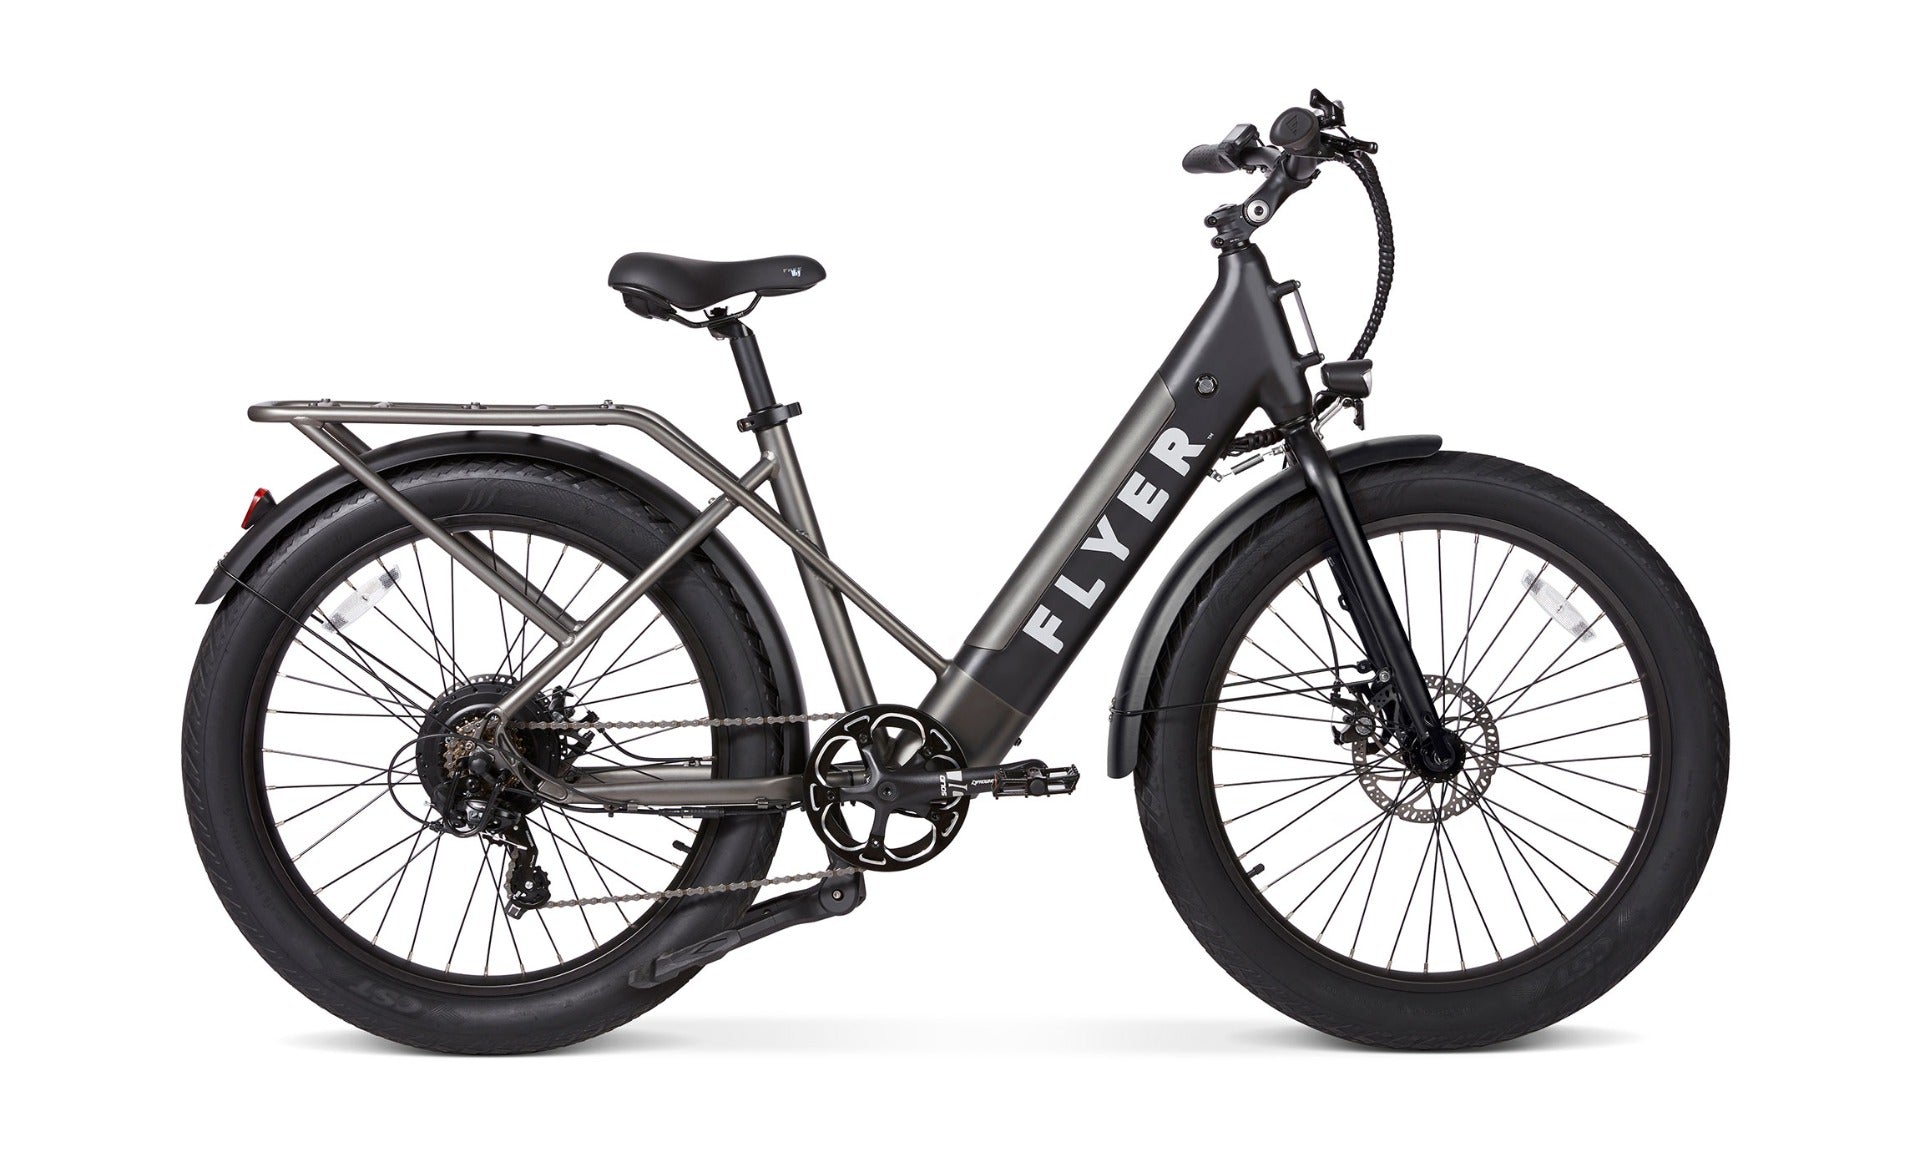 Flyer M880 | Flyer eBikes by Radio Flyer